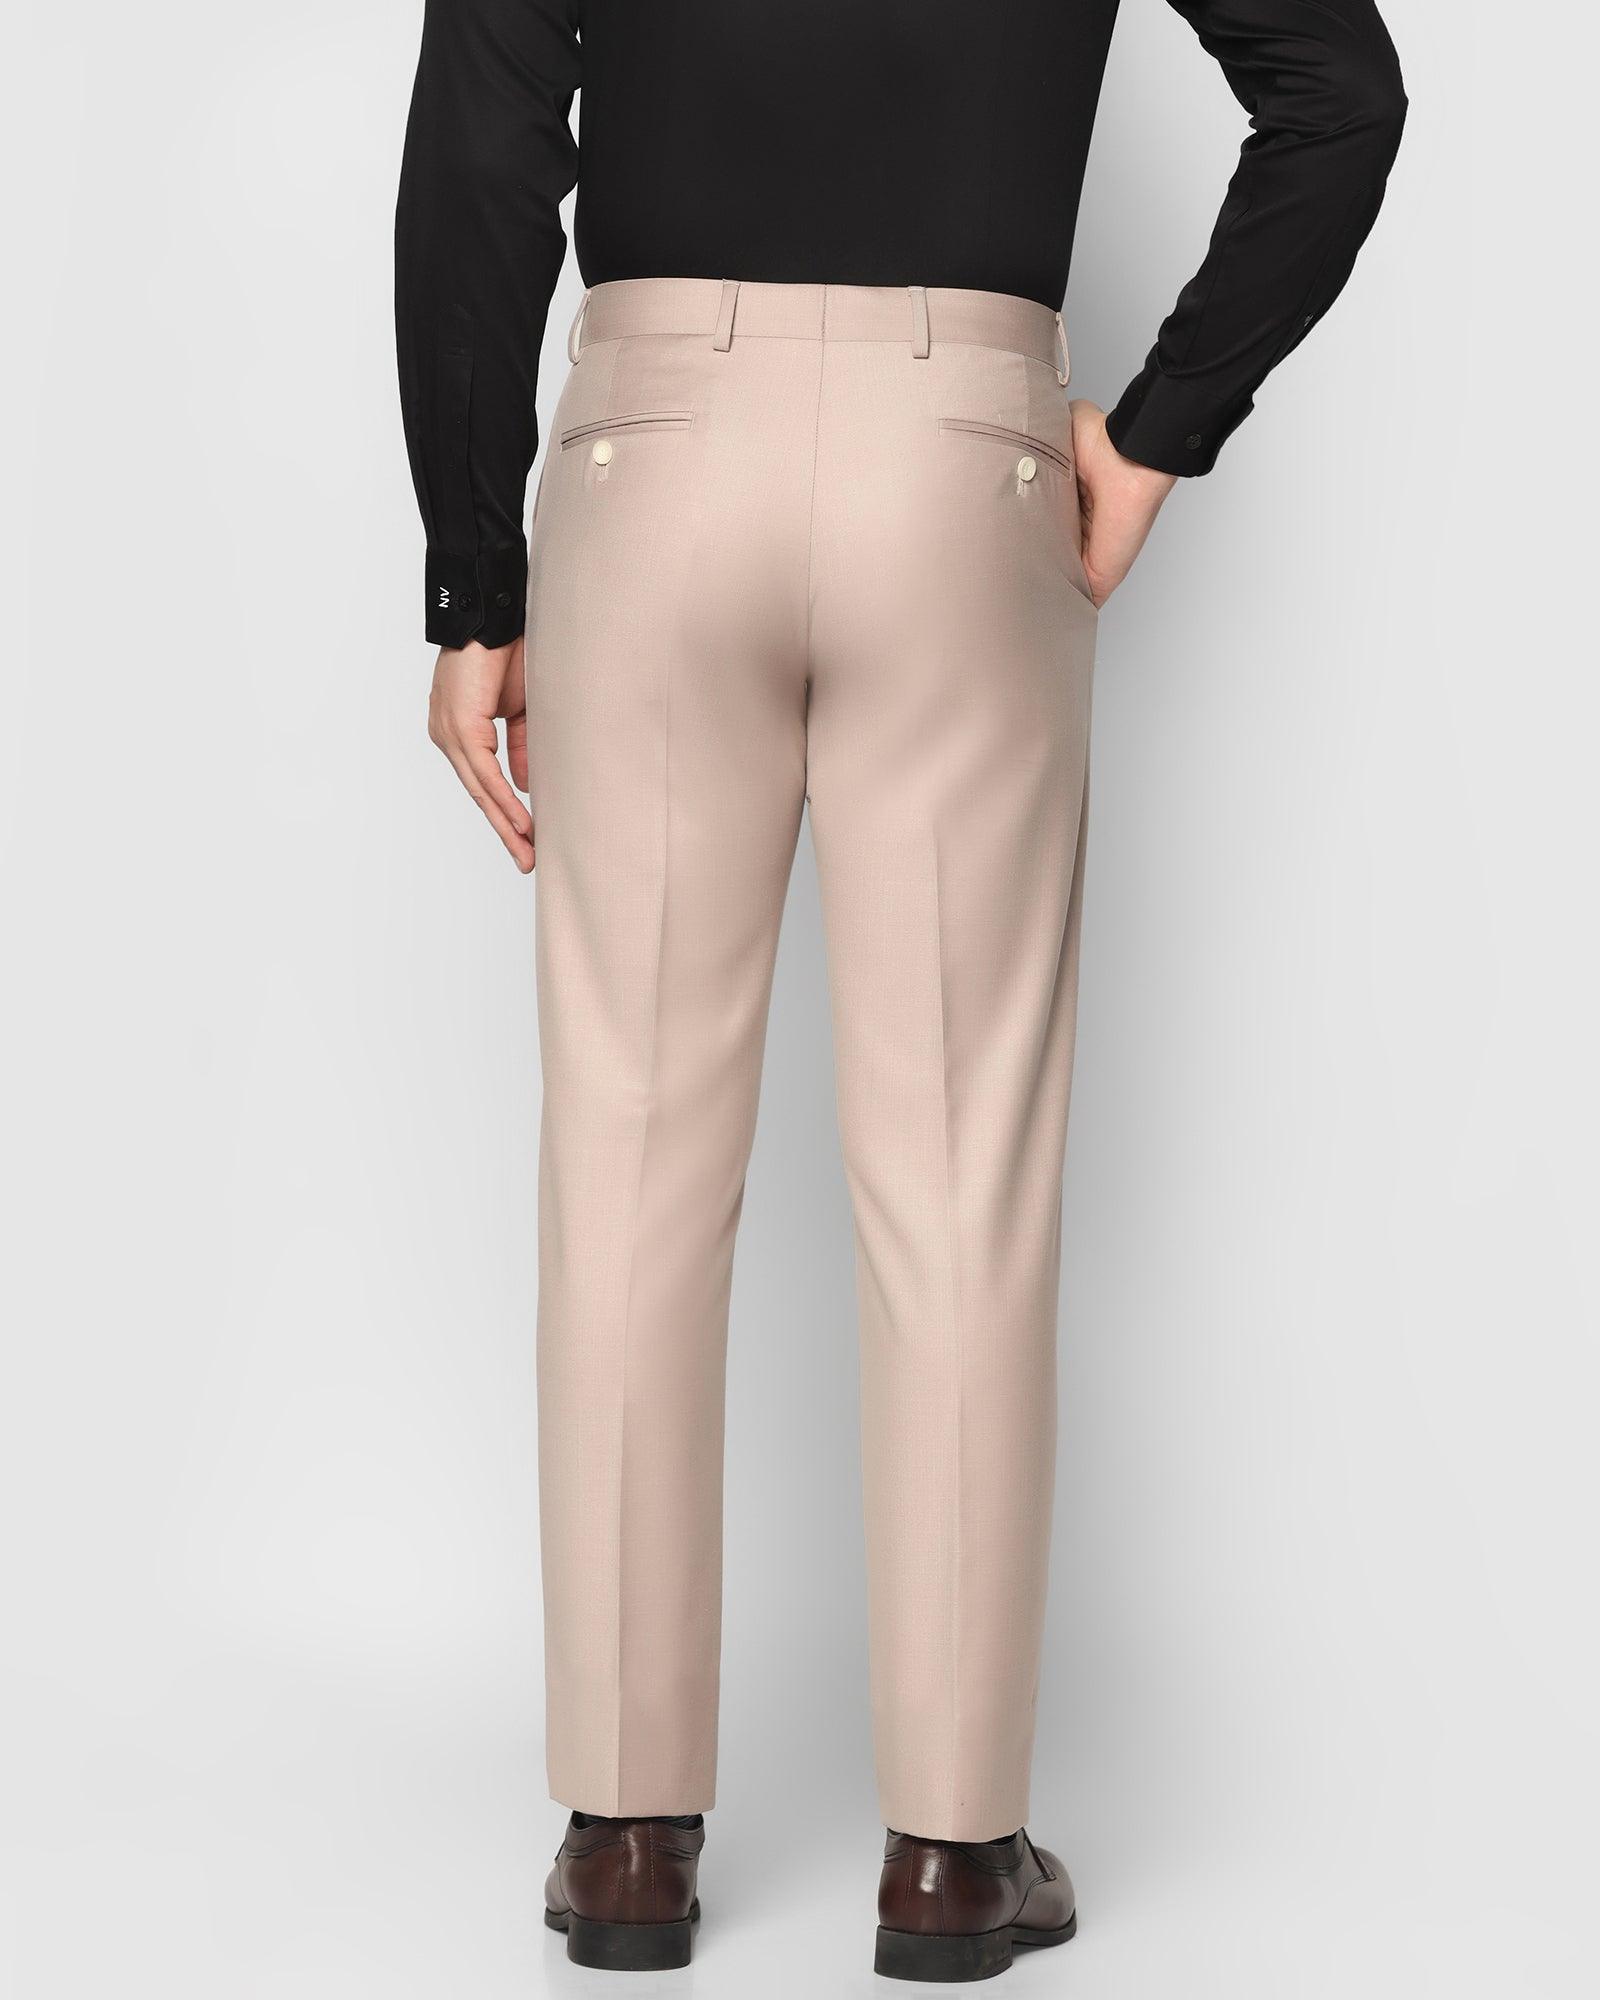 Women's formal trousers beige colour with a smooth pattern 15367 - willsoor